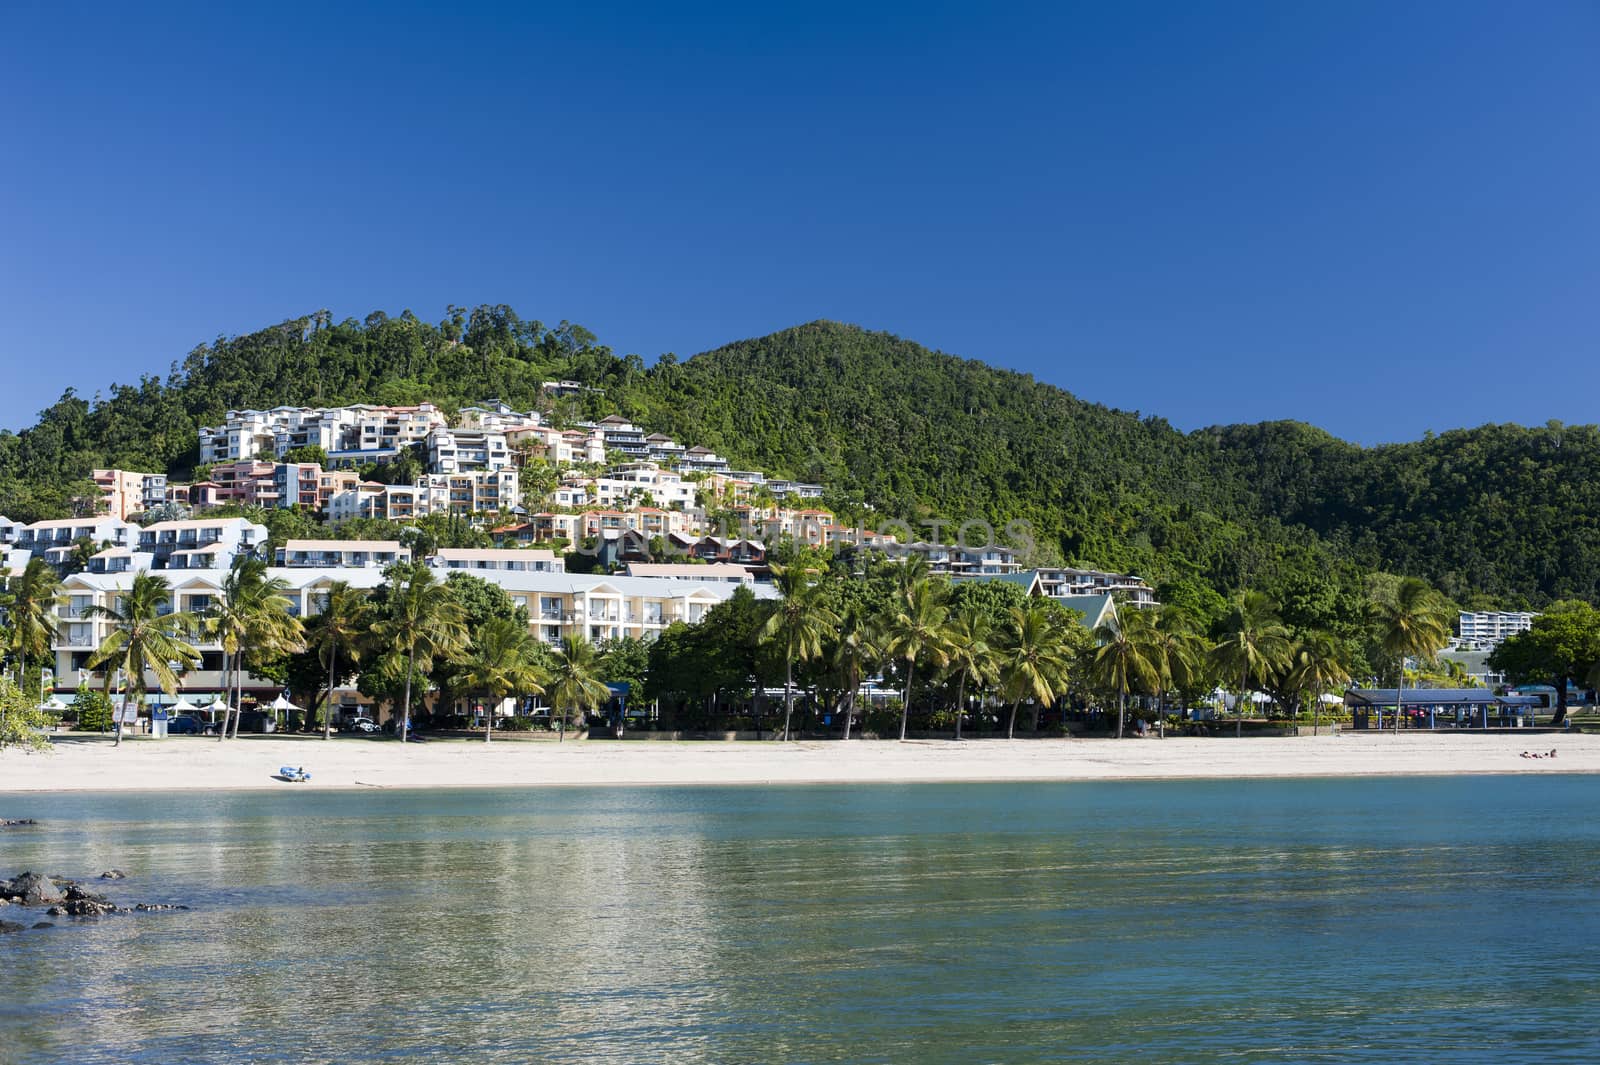 Scenic view of lovely hillside beach resort pf Airlie Beach on a pleasant day and a bright sun